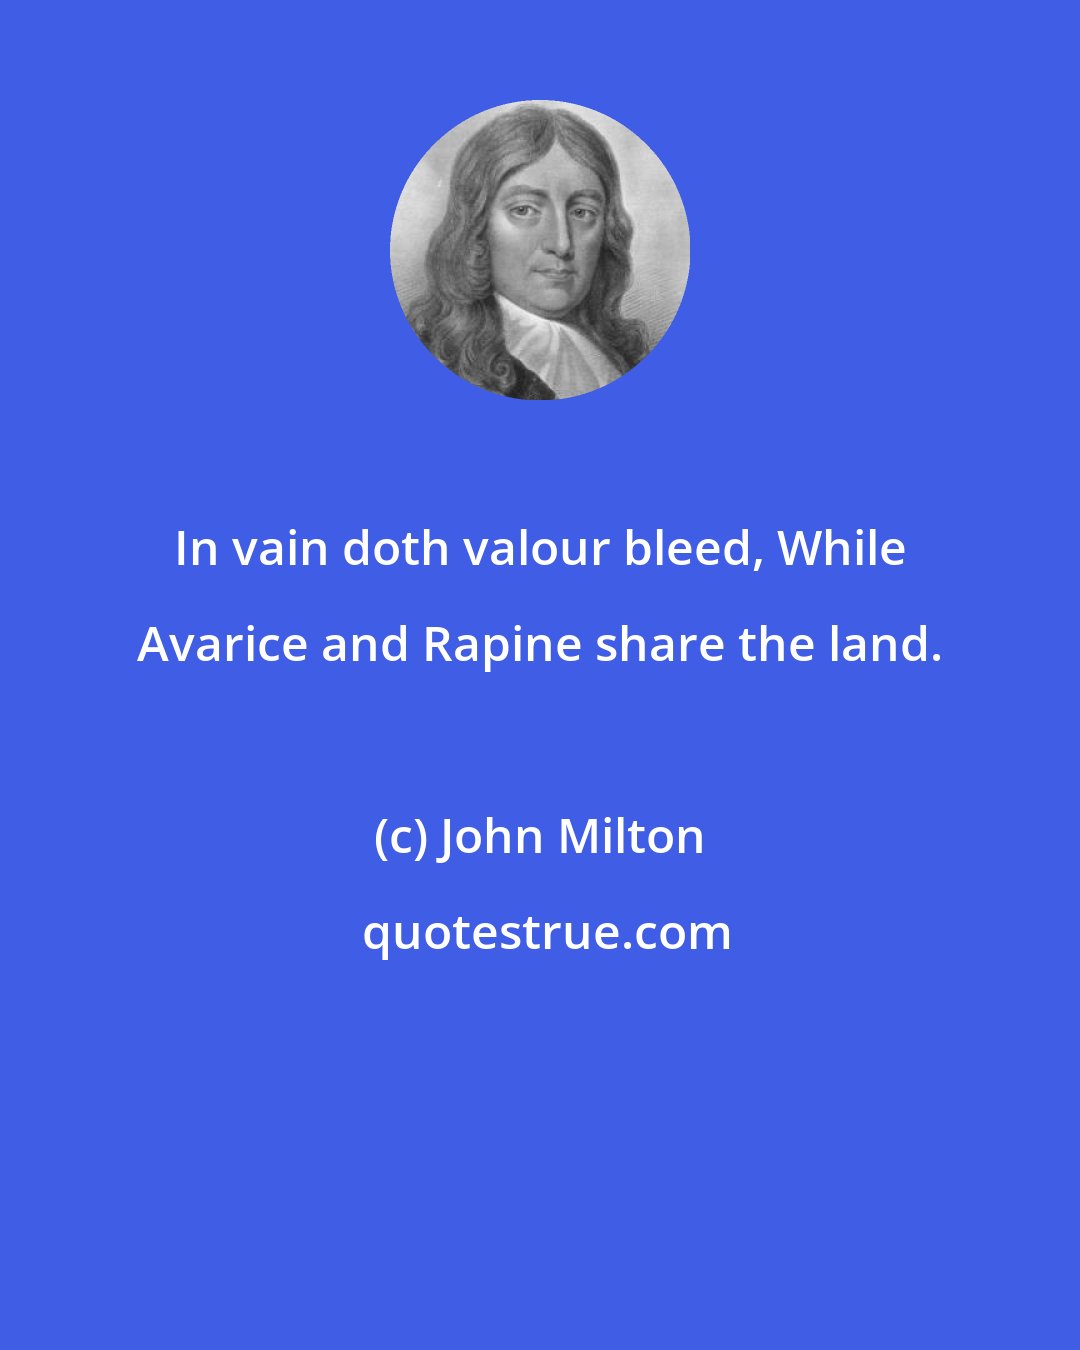 John Milton: In vain doth valour bleed, While Avarice and Rapine share the land.